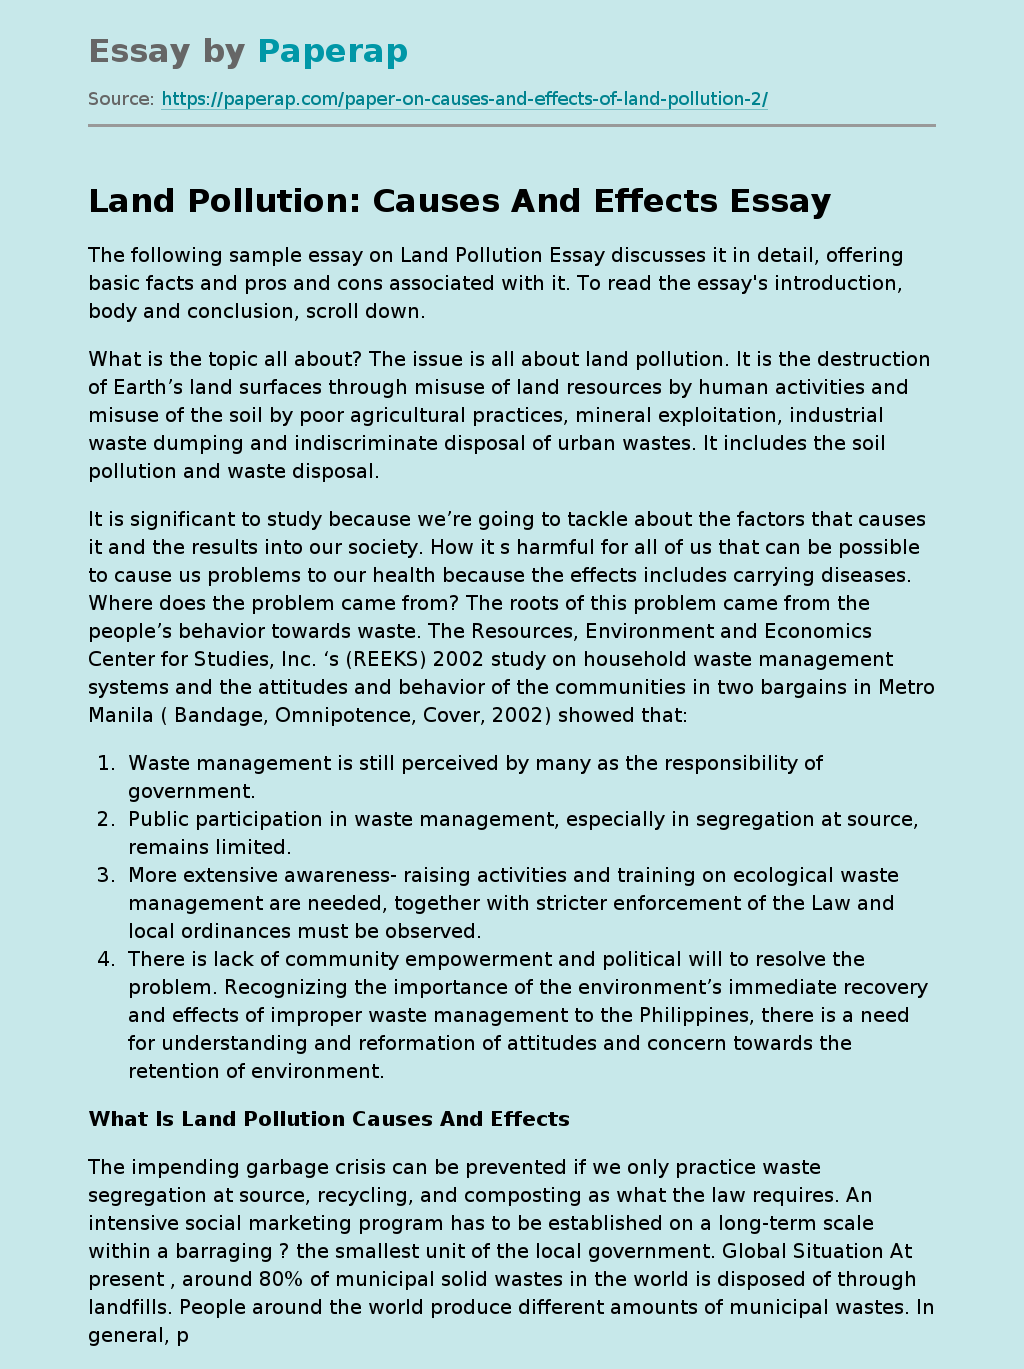 Land Pollution: Causes And Effects